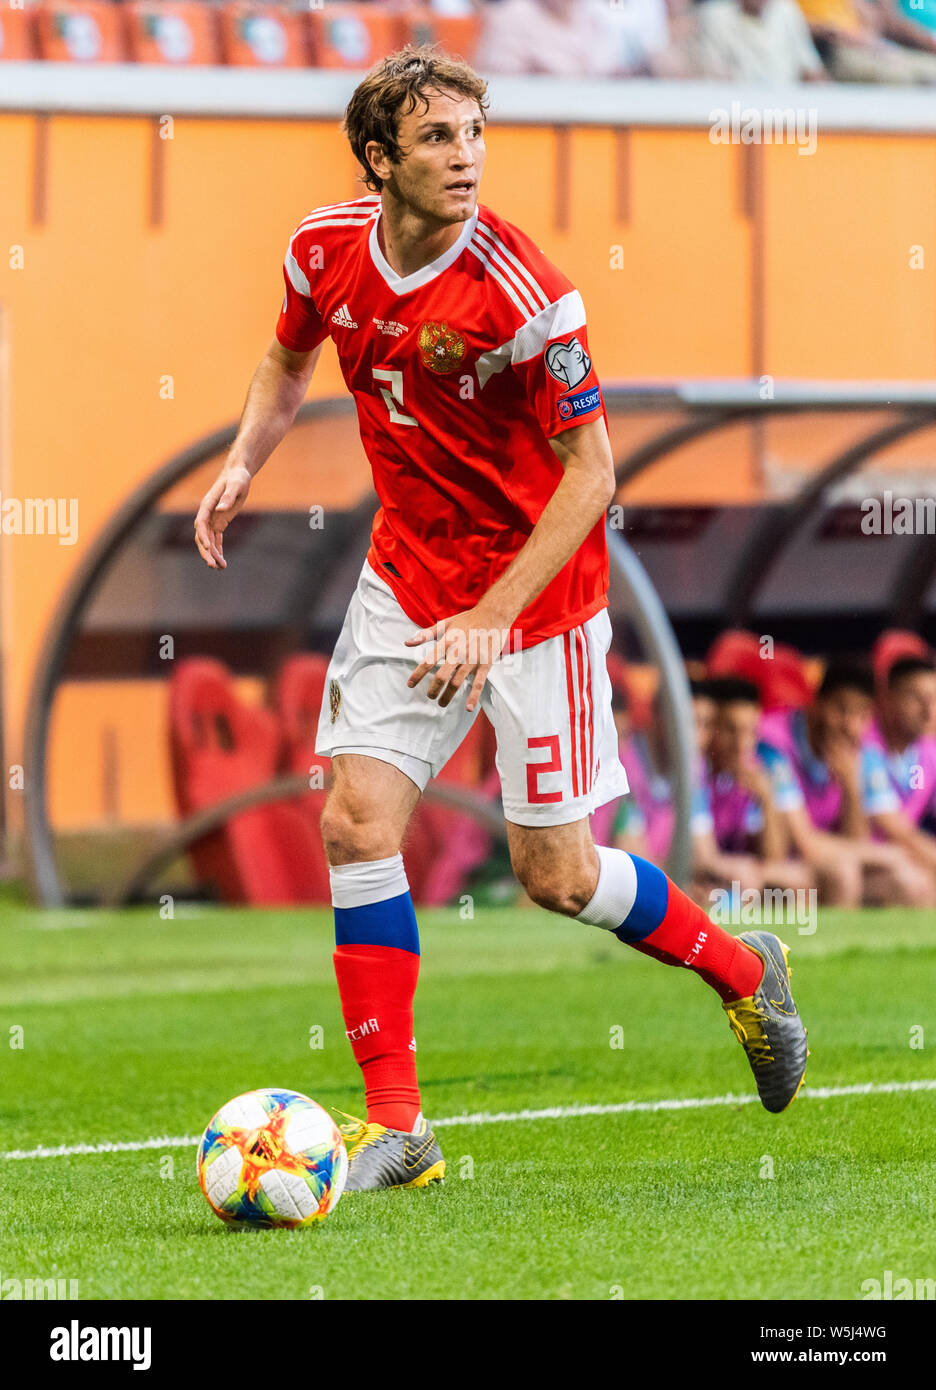 Saransk, Russia -June 8, 2019. Russia national team defender Mario Fernandes during UEFA Euro 2020 qualification match Russia vs San Marino (9-0) in S Stock Photo